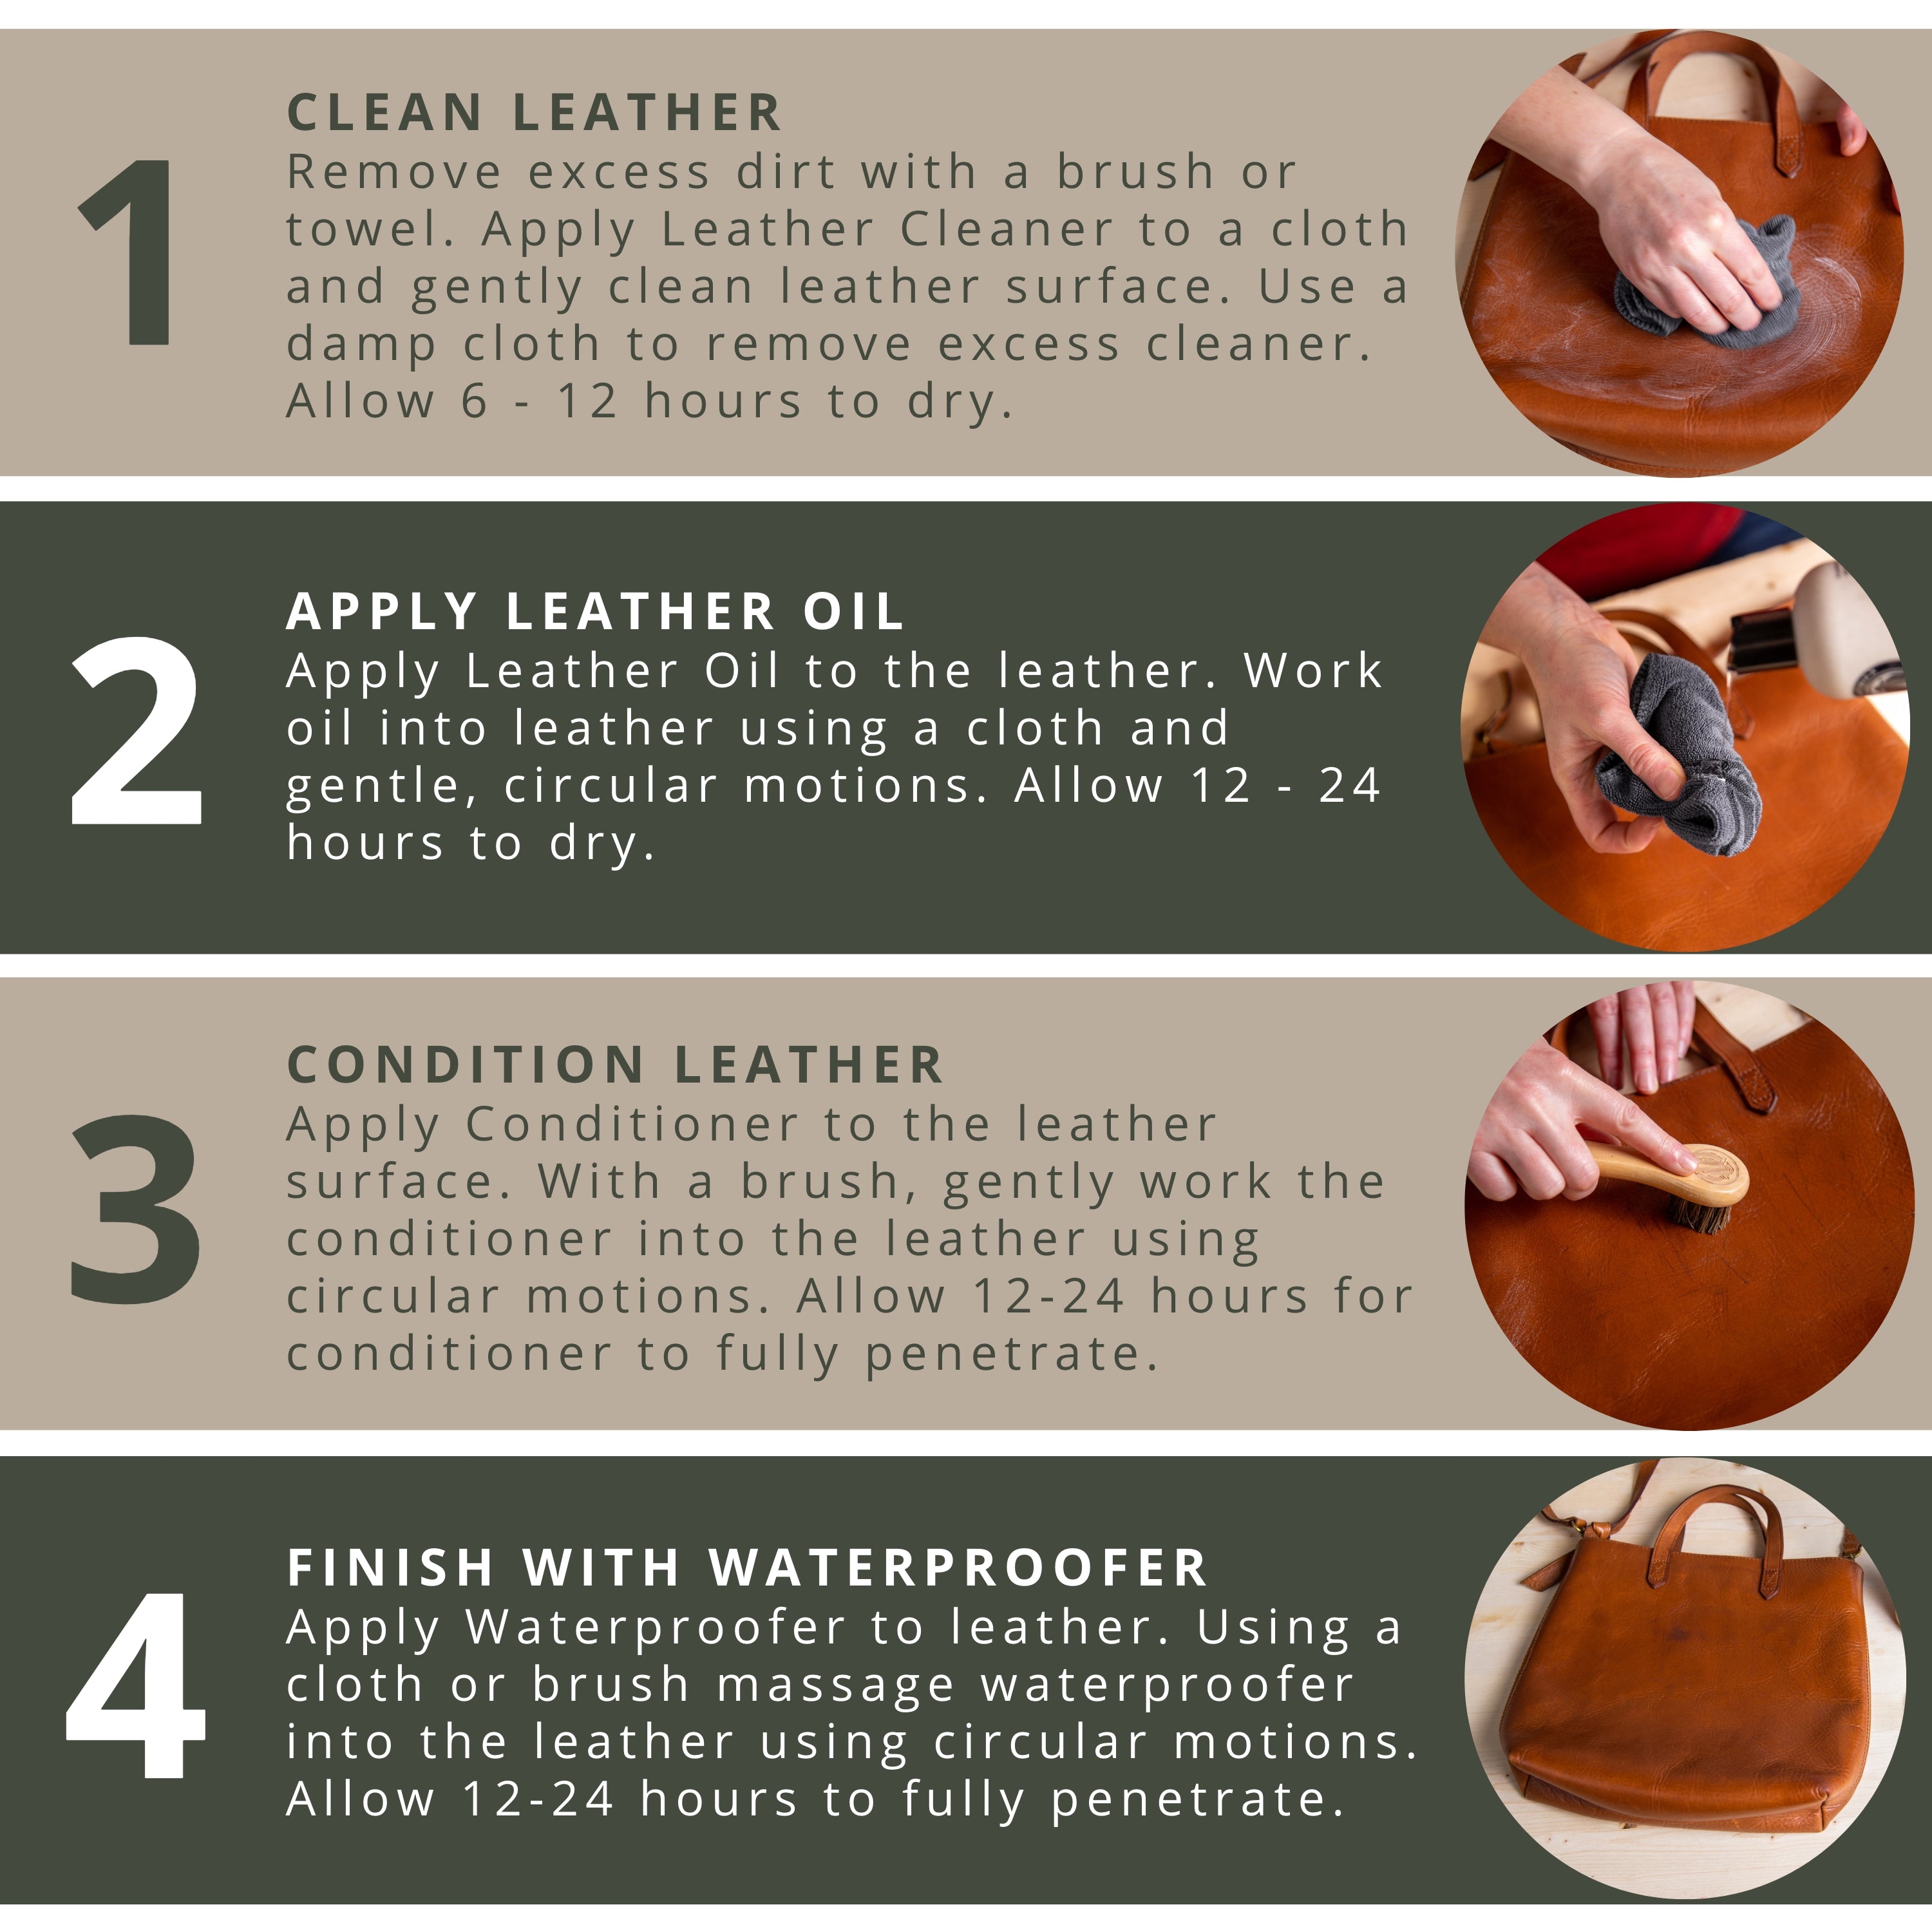 Rhino Wax - Leather Conditioner (4 oz) - Trusted Leather Conditioner for  Furniture, Shoes, Purses, Car Seats, and Leather Boot Care - Rejuvenate and